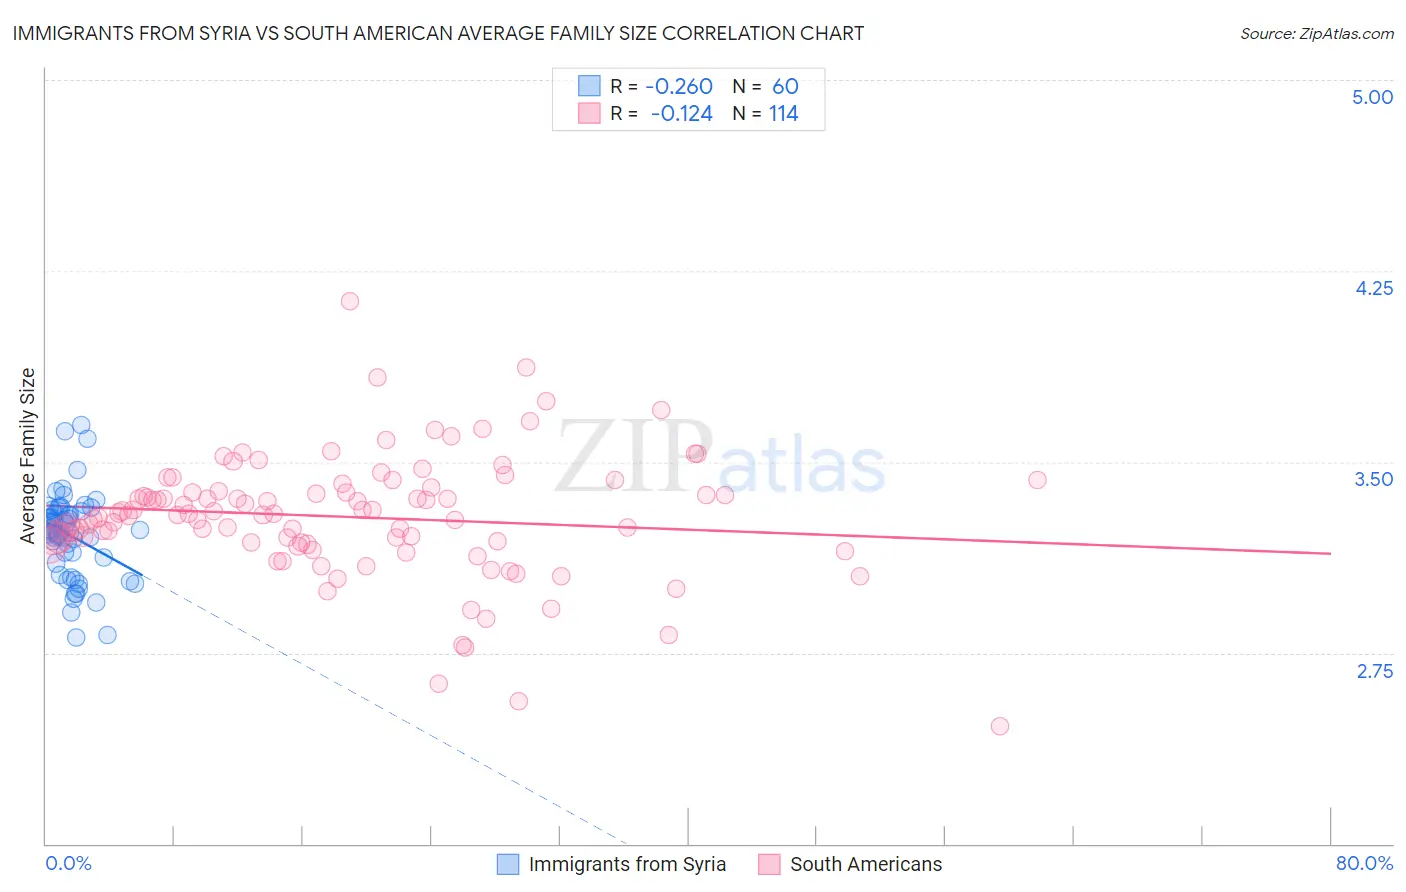 Immigrants from Syria vs South American Average Family Size